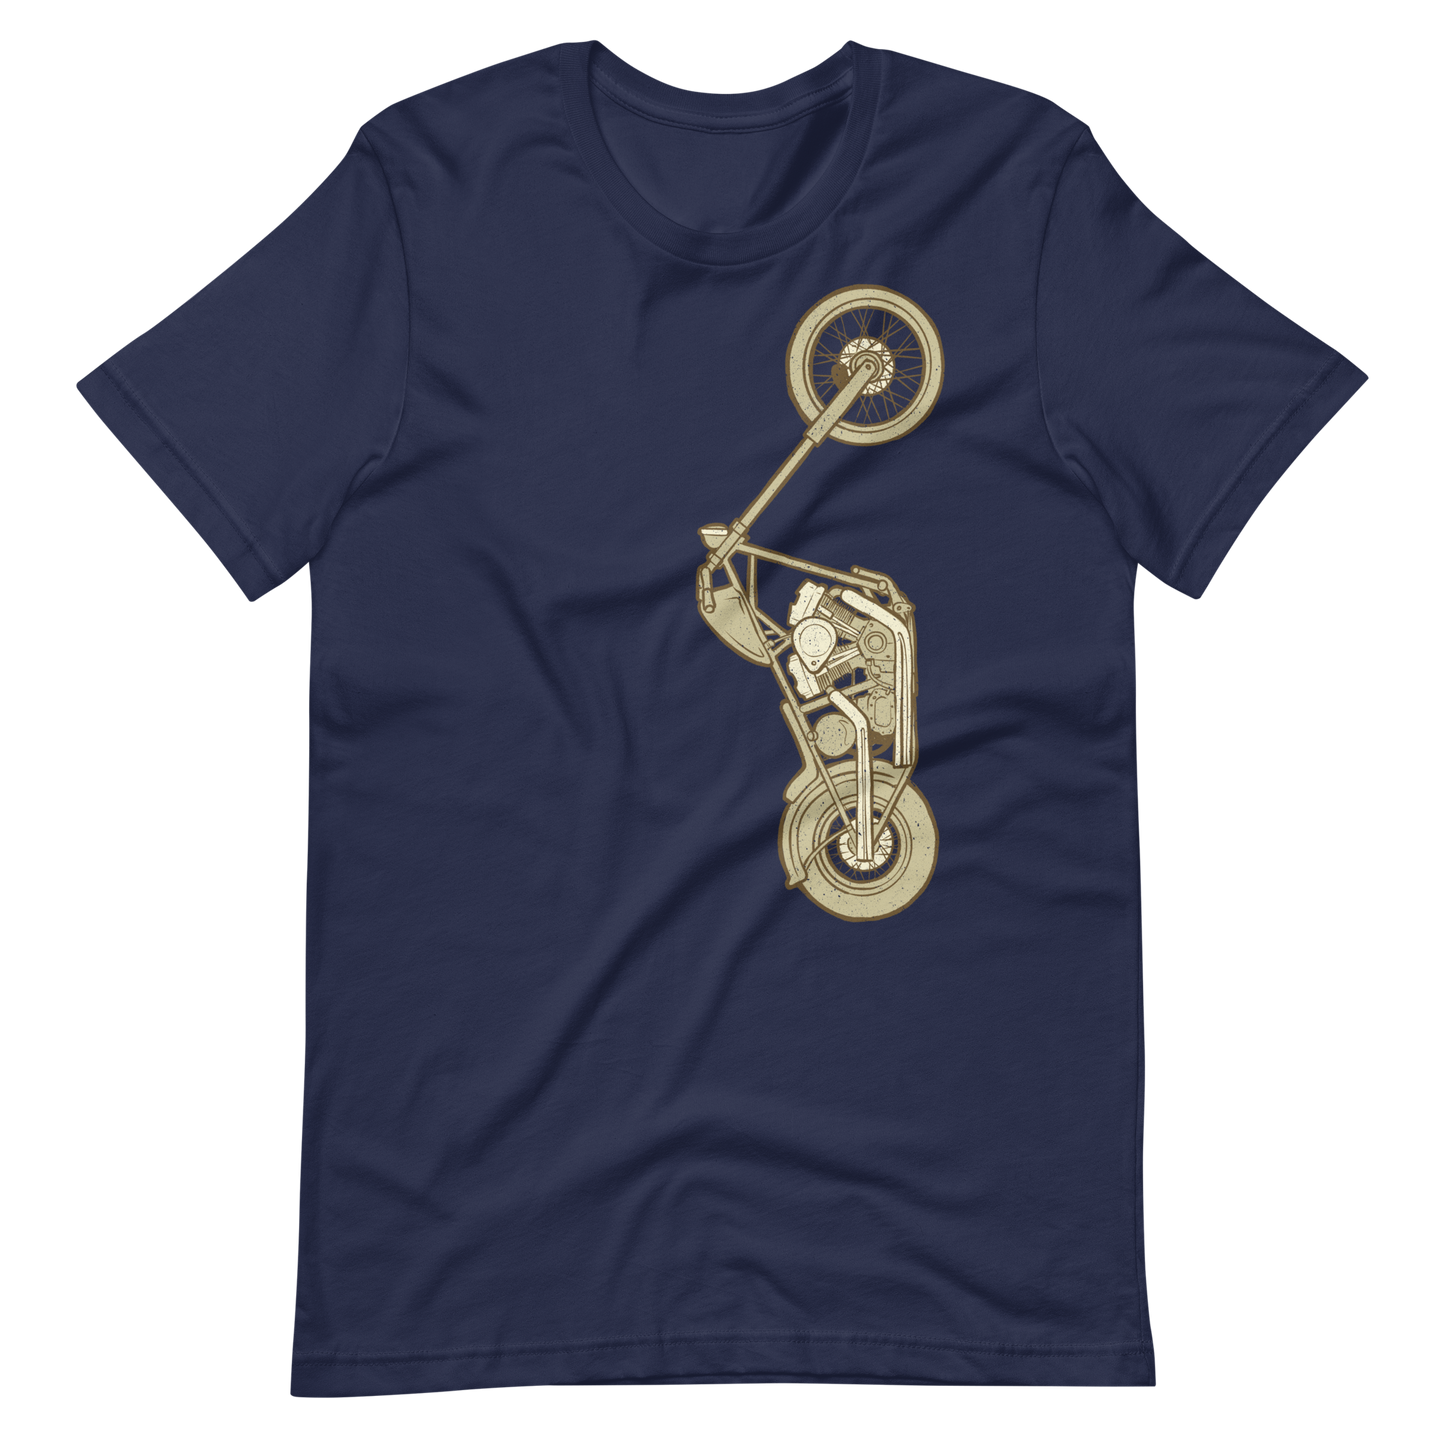 Navy Ride in style with the Custom Motorcycle T-shirt—a vintage-style bobber biker shirt perfect for the cool biker rider, featuring distinctive style. This stylish motorcycle shirt is ideal for the biker journey tourer, capturing the essence of classic motorcycle style with a touch of retro coolness.